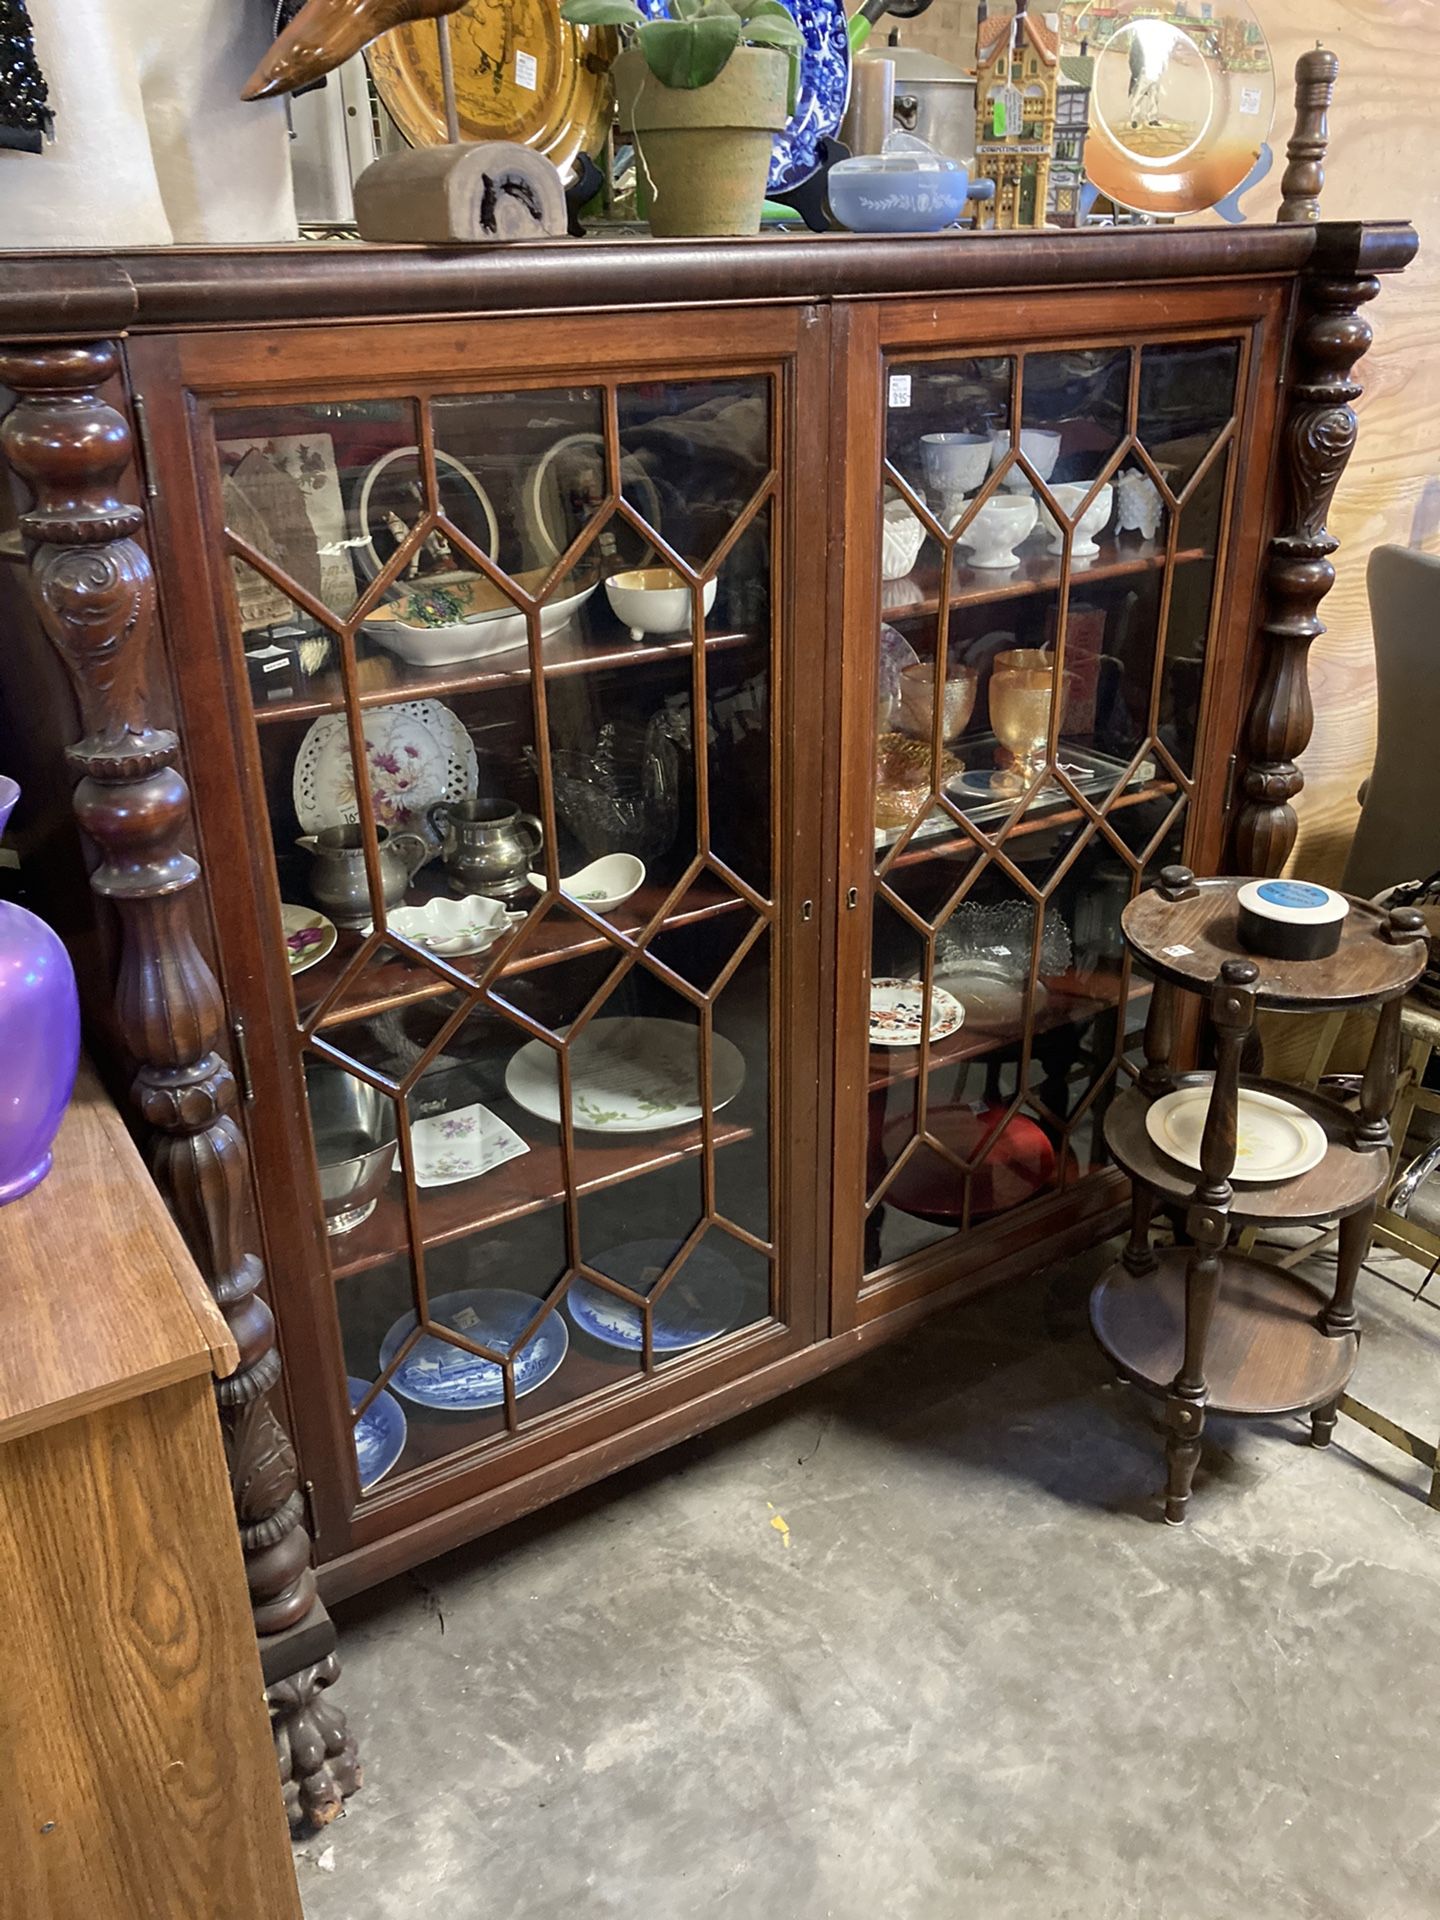 Bookcase/Display Cabinet